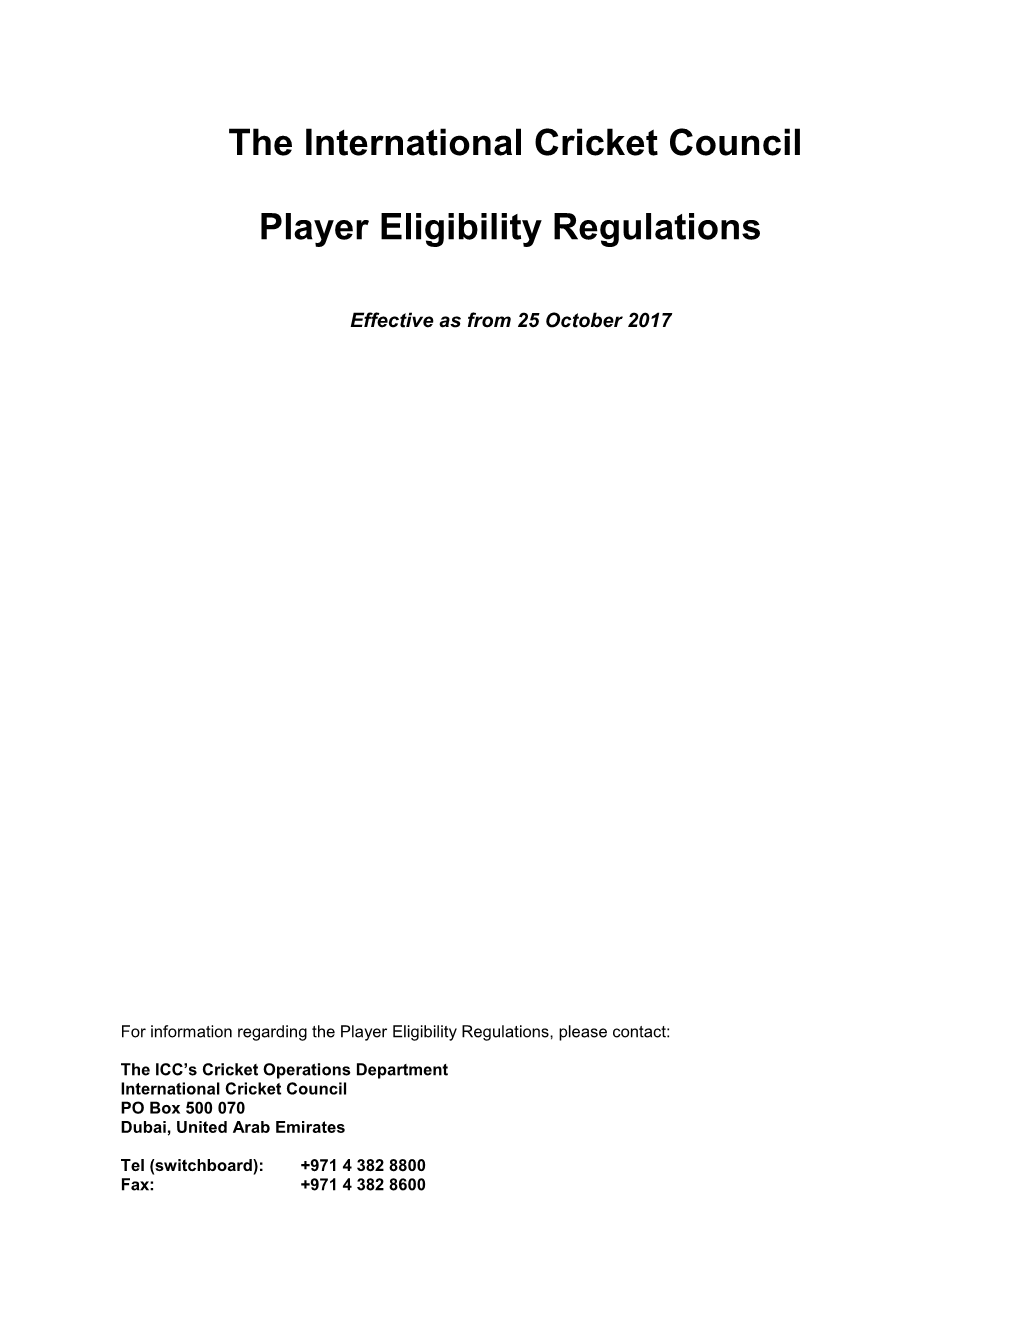 The International Cricket Council Player Eligibility Regulations